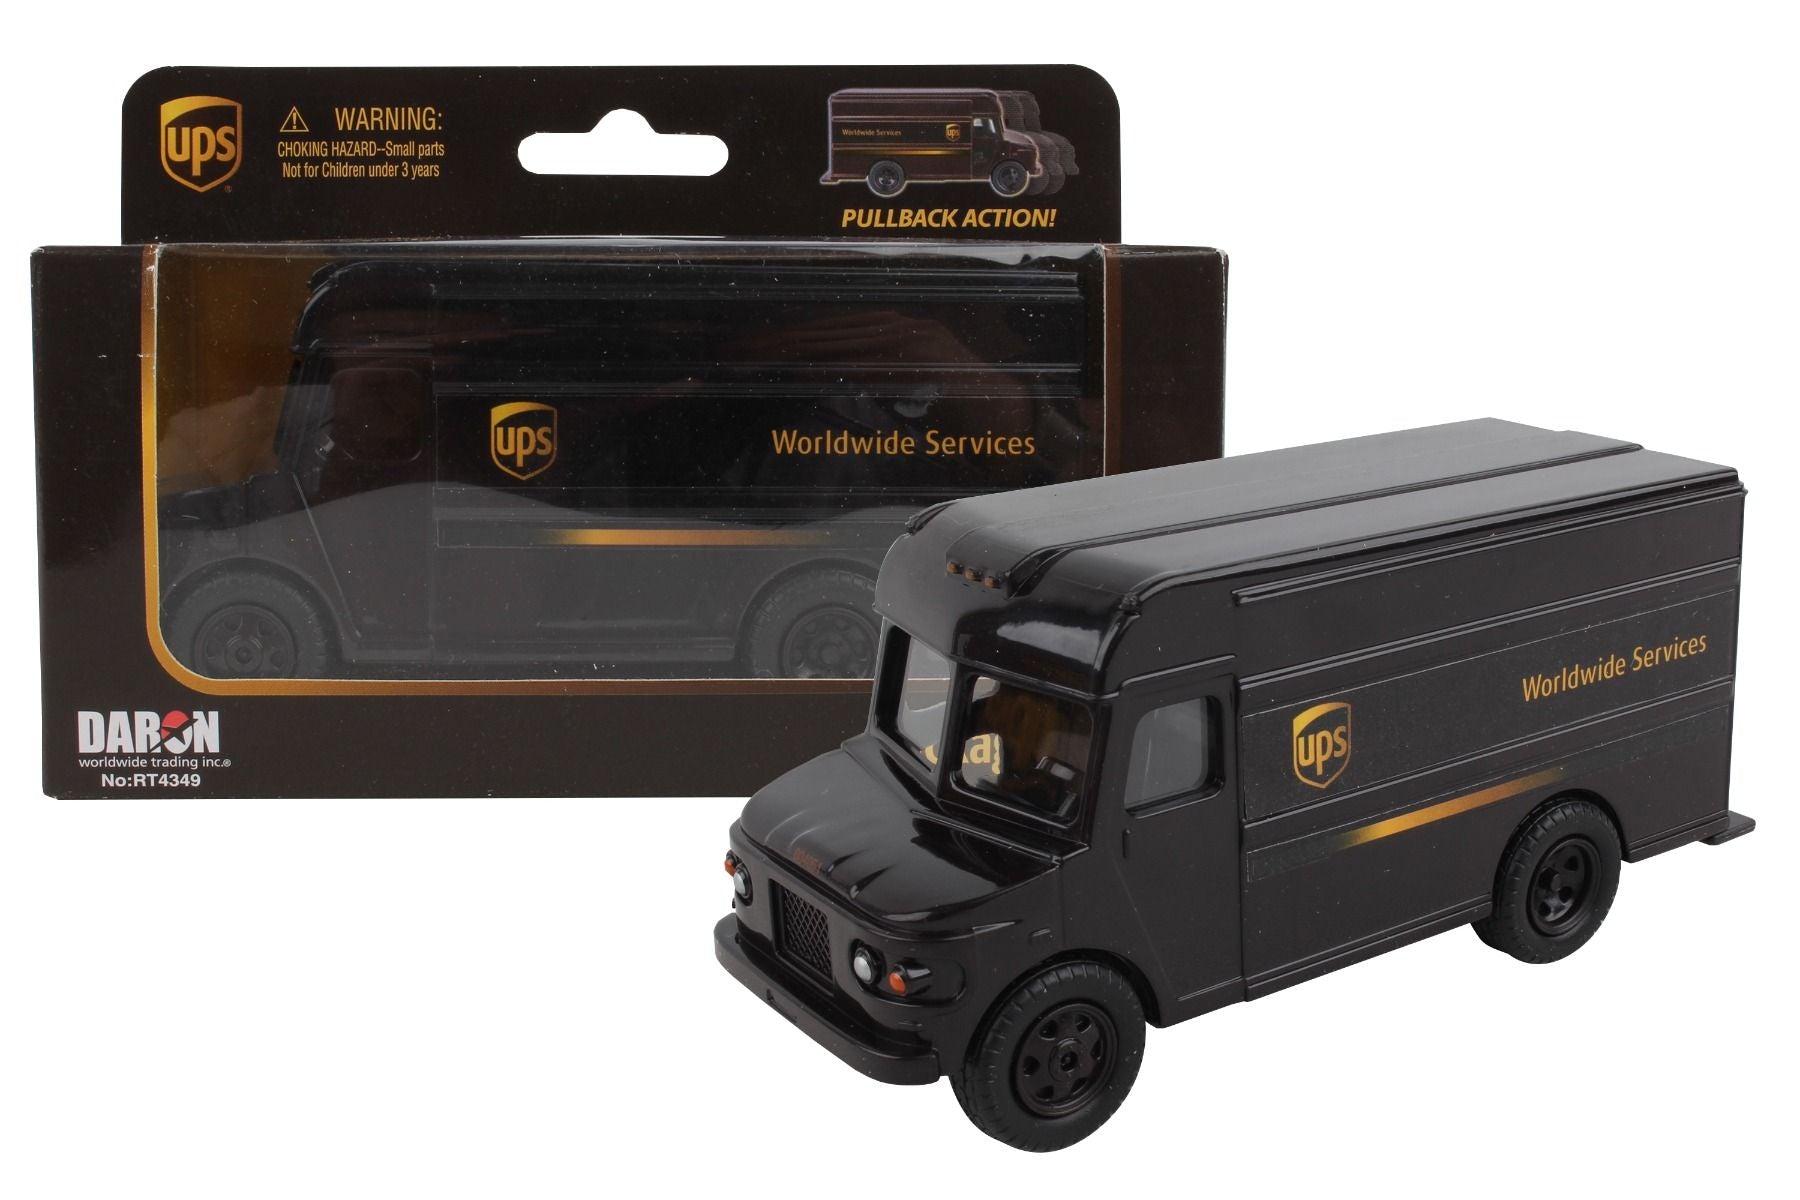 DARON RT4349 UPS PULLBACK PACKAGE CAR